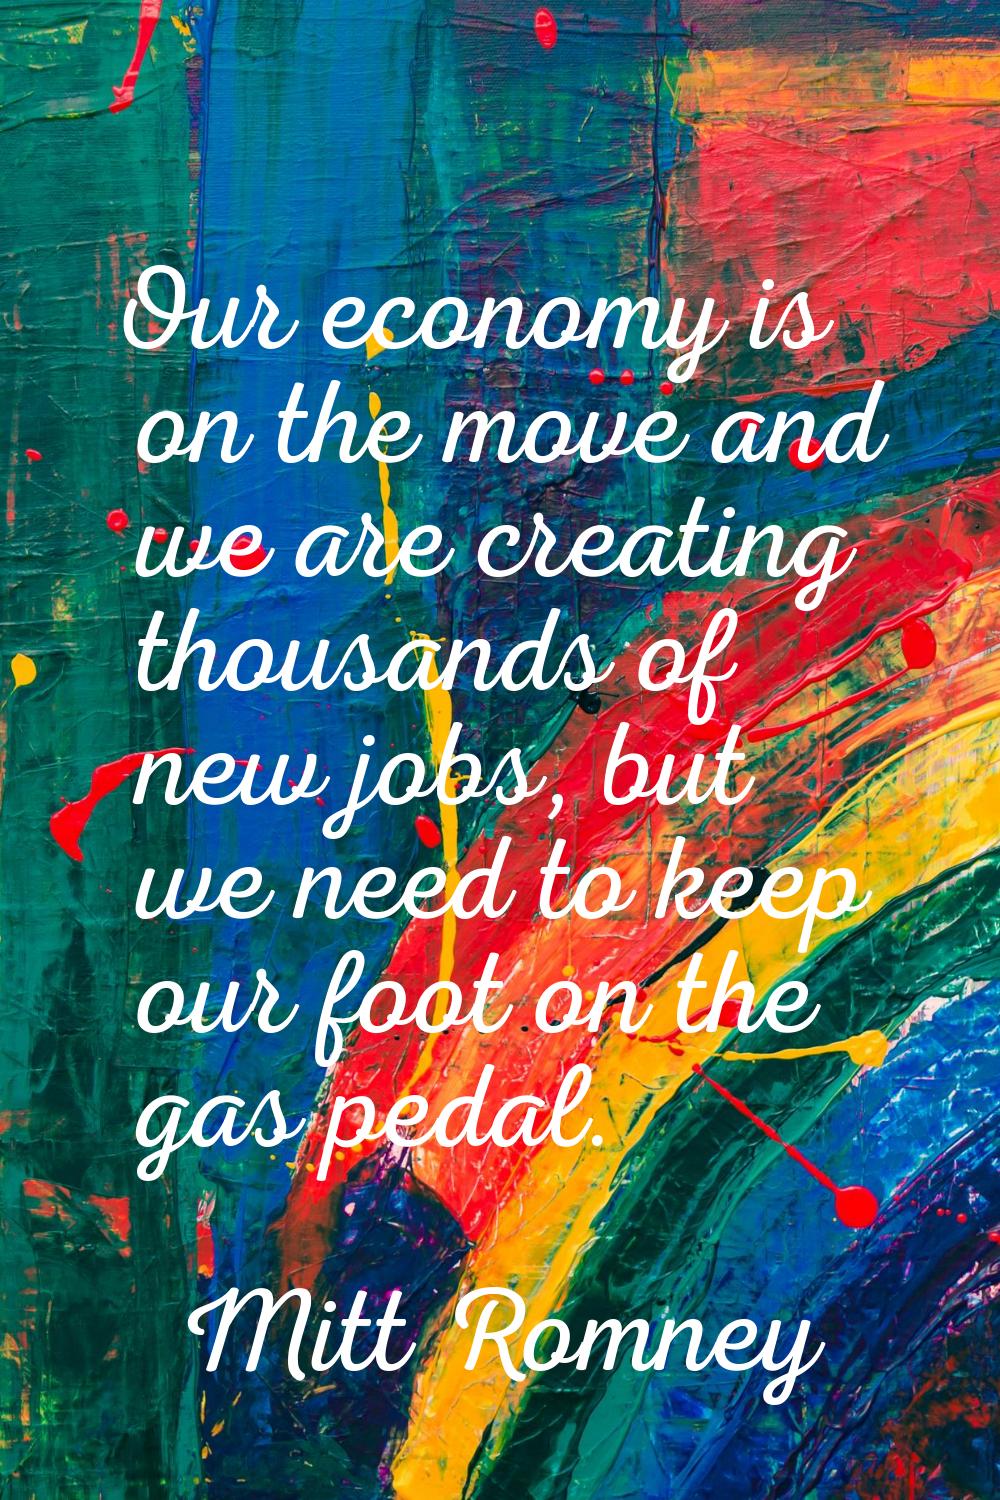 Our economy is on the move and we are creating thousands of new jobs, but we need to keep our foot 